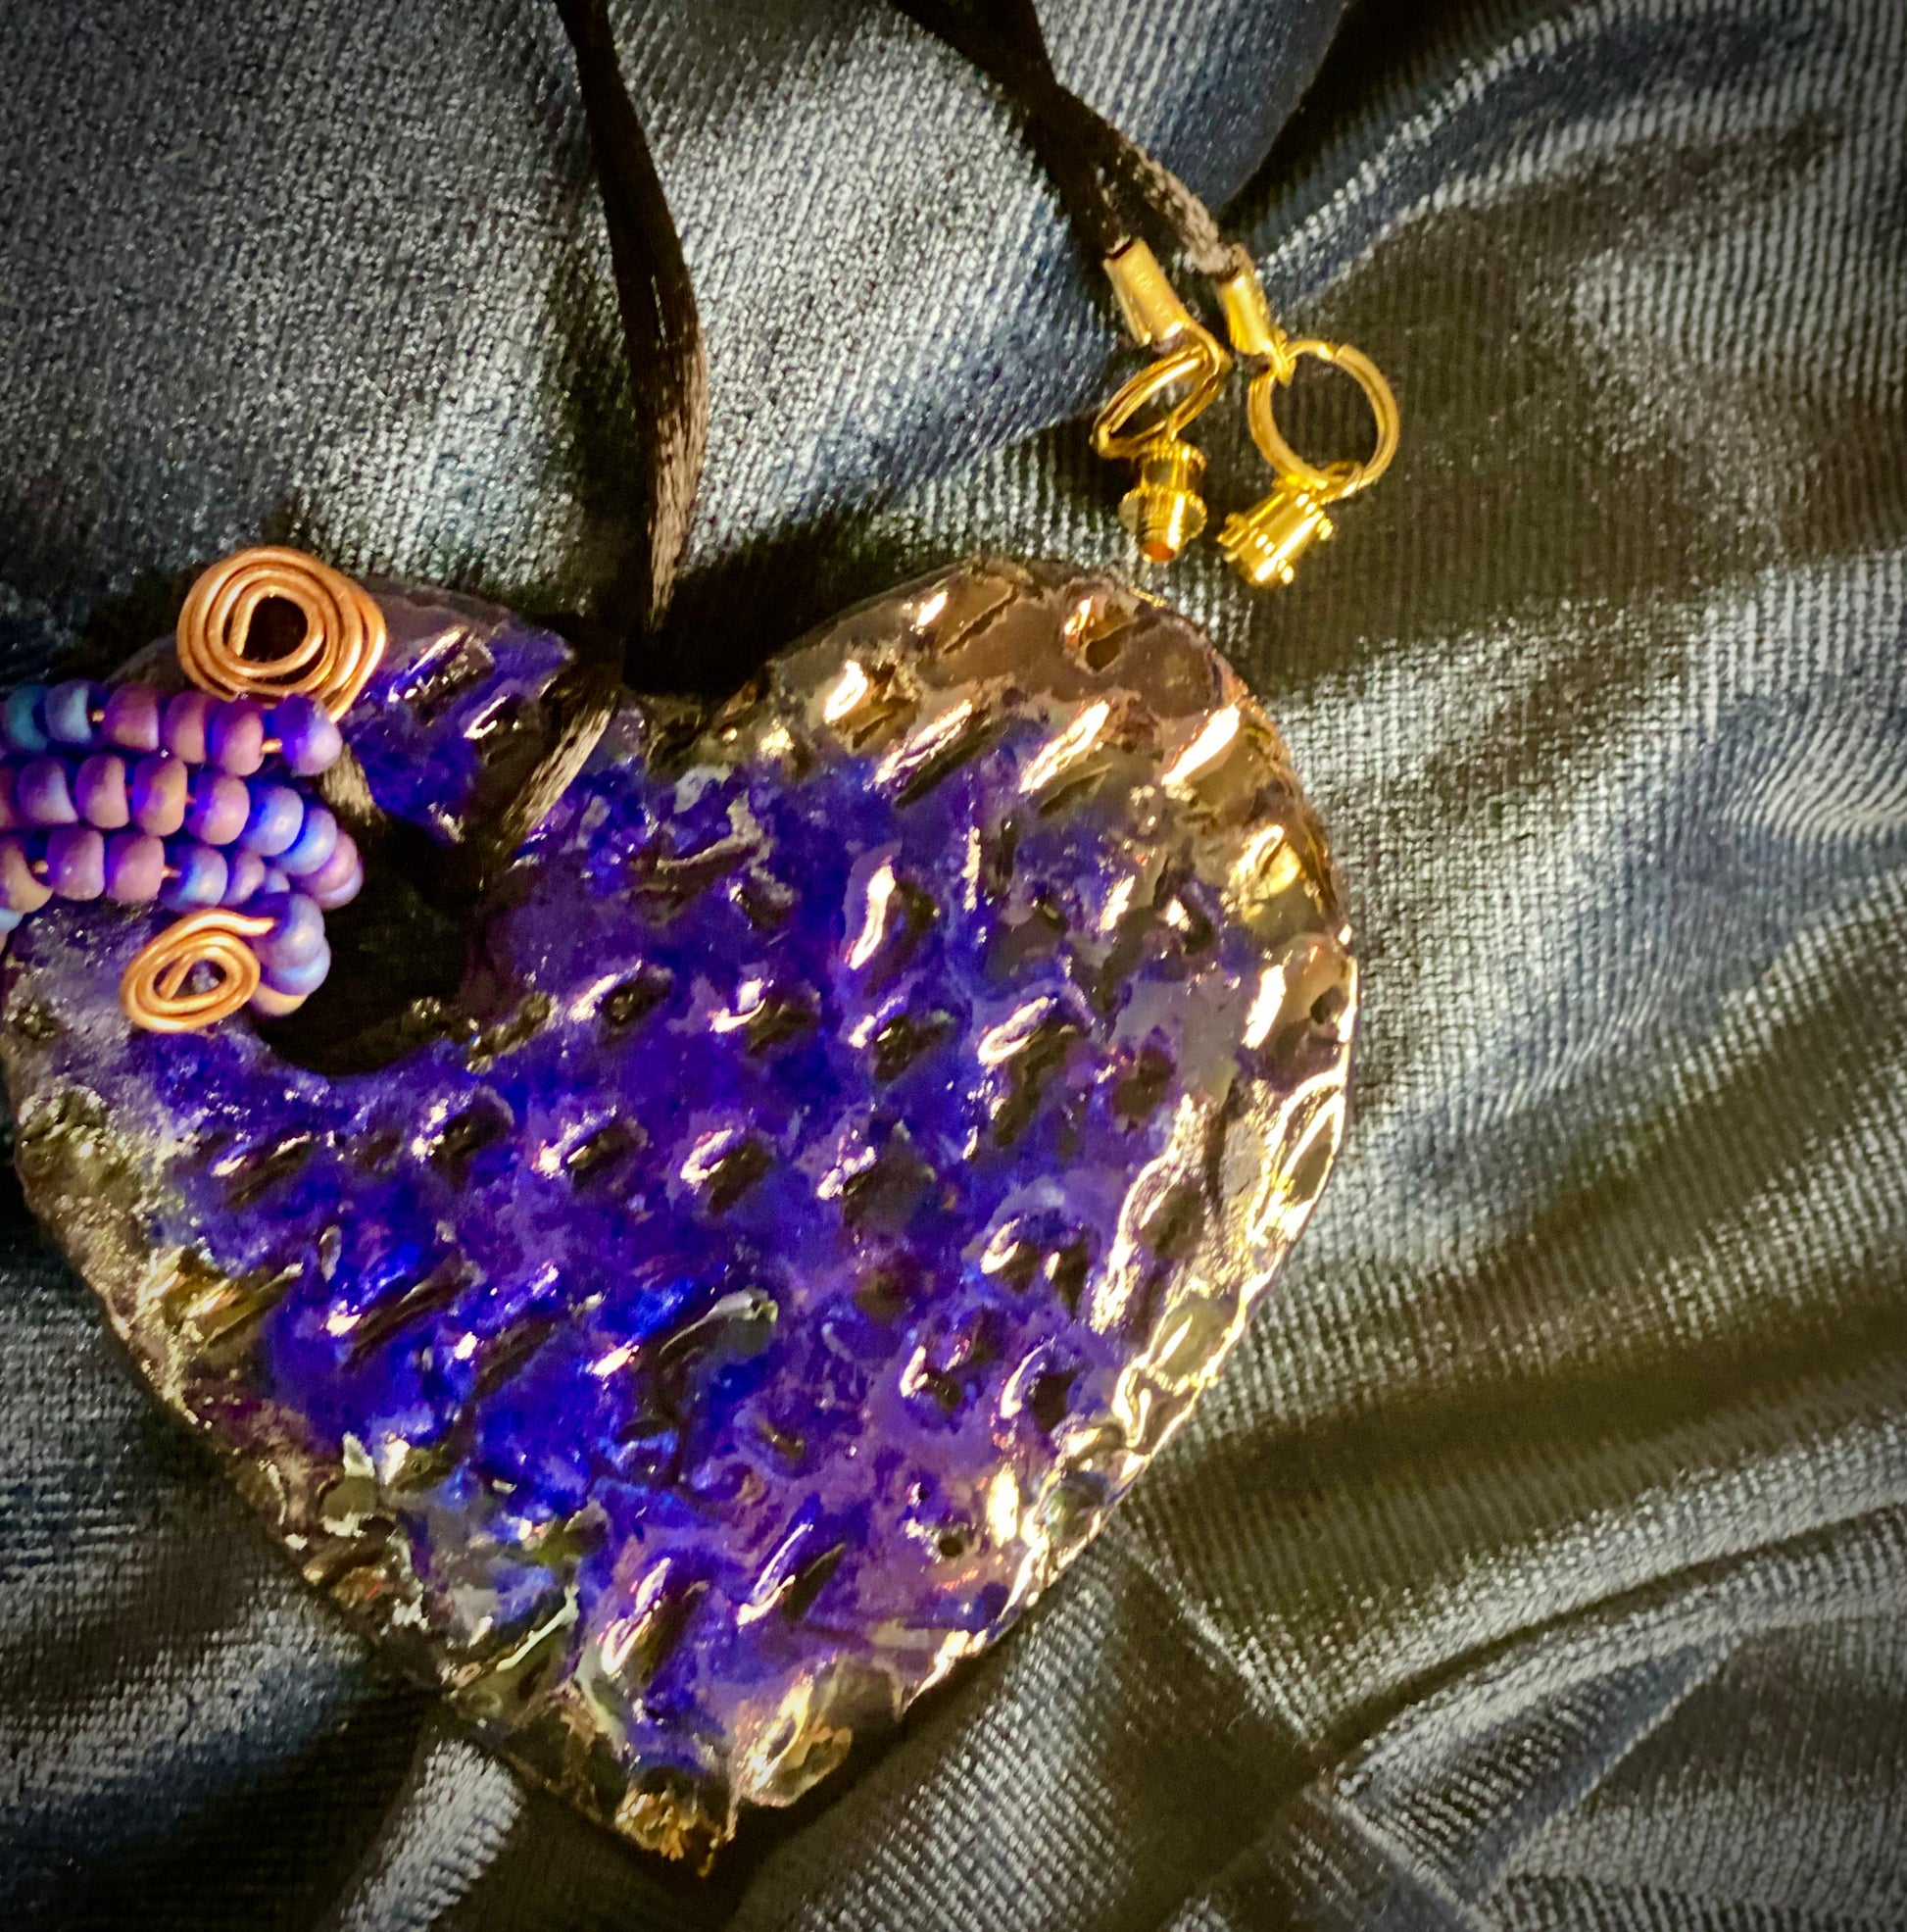  Have A Heart ! Each heart pendant is handmade with love! It is 3"x 3" and weighs approx. 3ozs. This pendant has a royal blue and gold metallic raku glazes that renders a unique translucent  patina. The heart  has a textured  pattern. It holds a spiral of off blue violet mini beads on a spiral copper wire. This pendant has a nice 12" black suede cord!